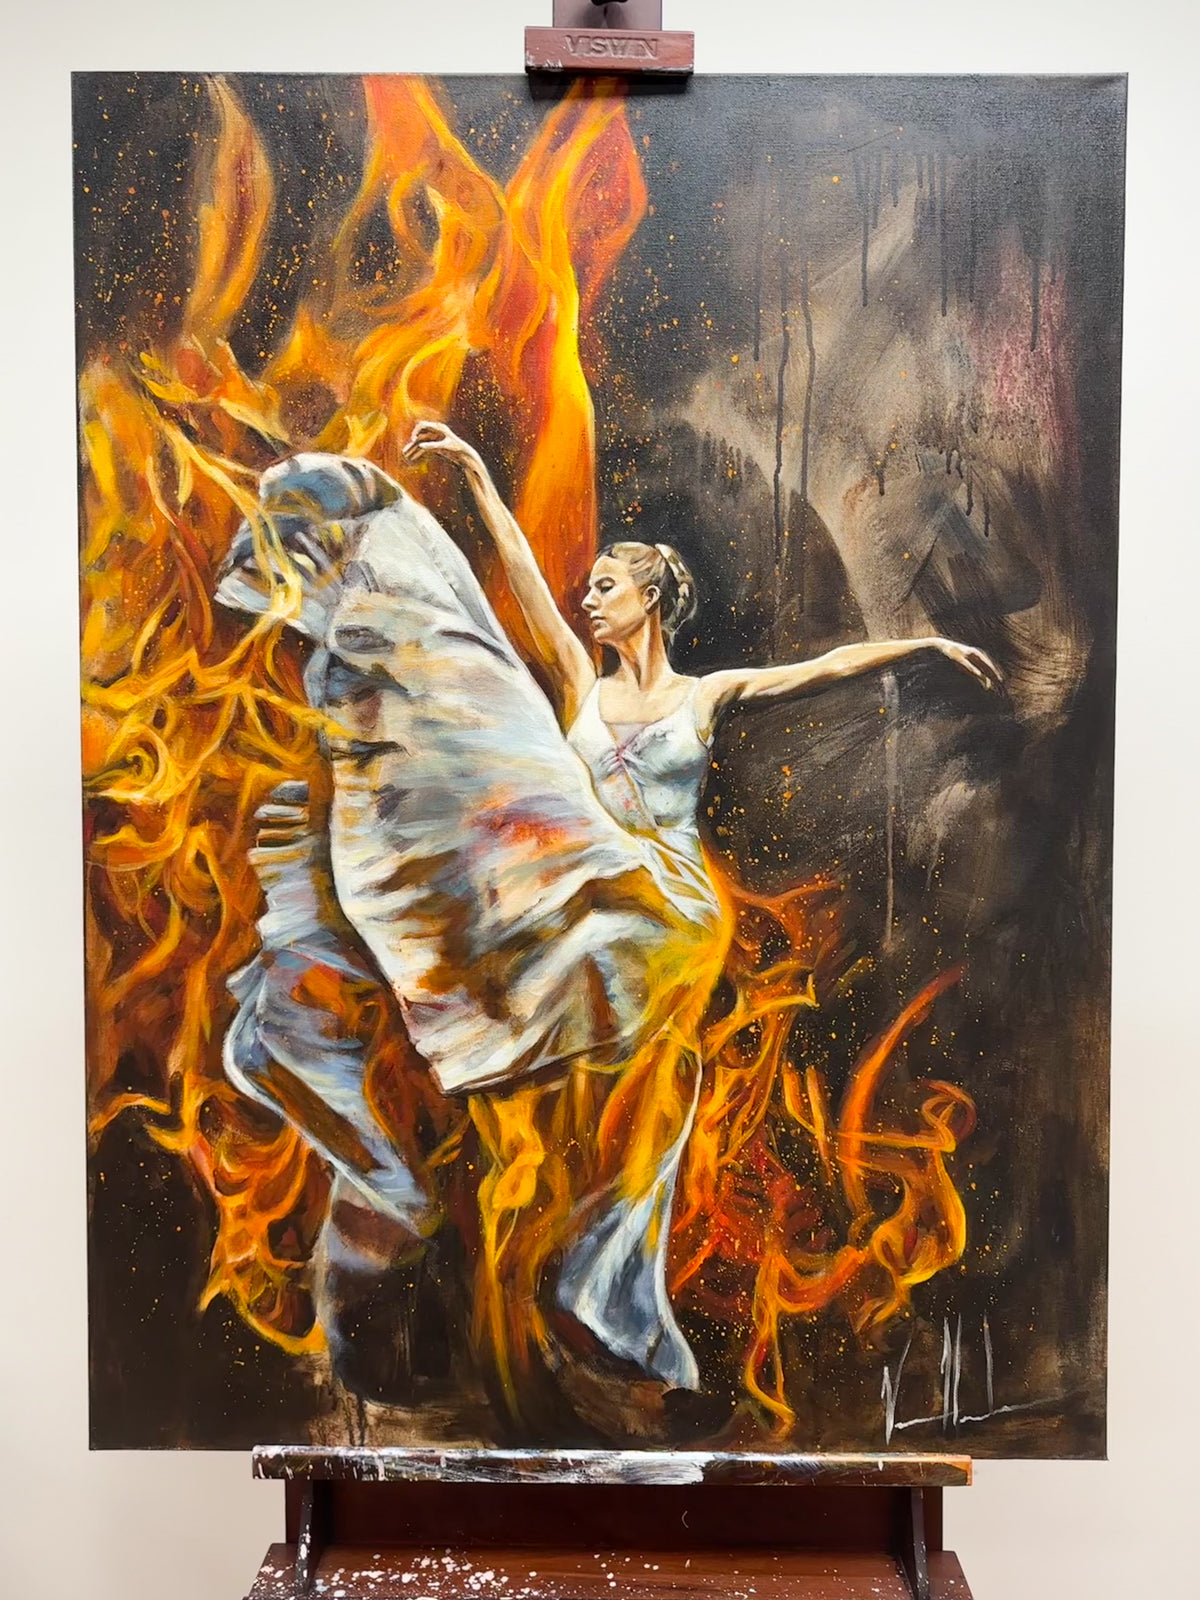 A Burning Flame Within - 30”x40” Original Acrylic Painting